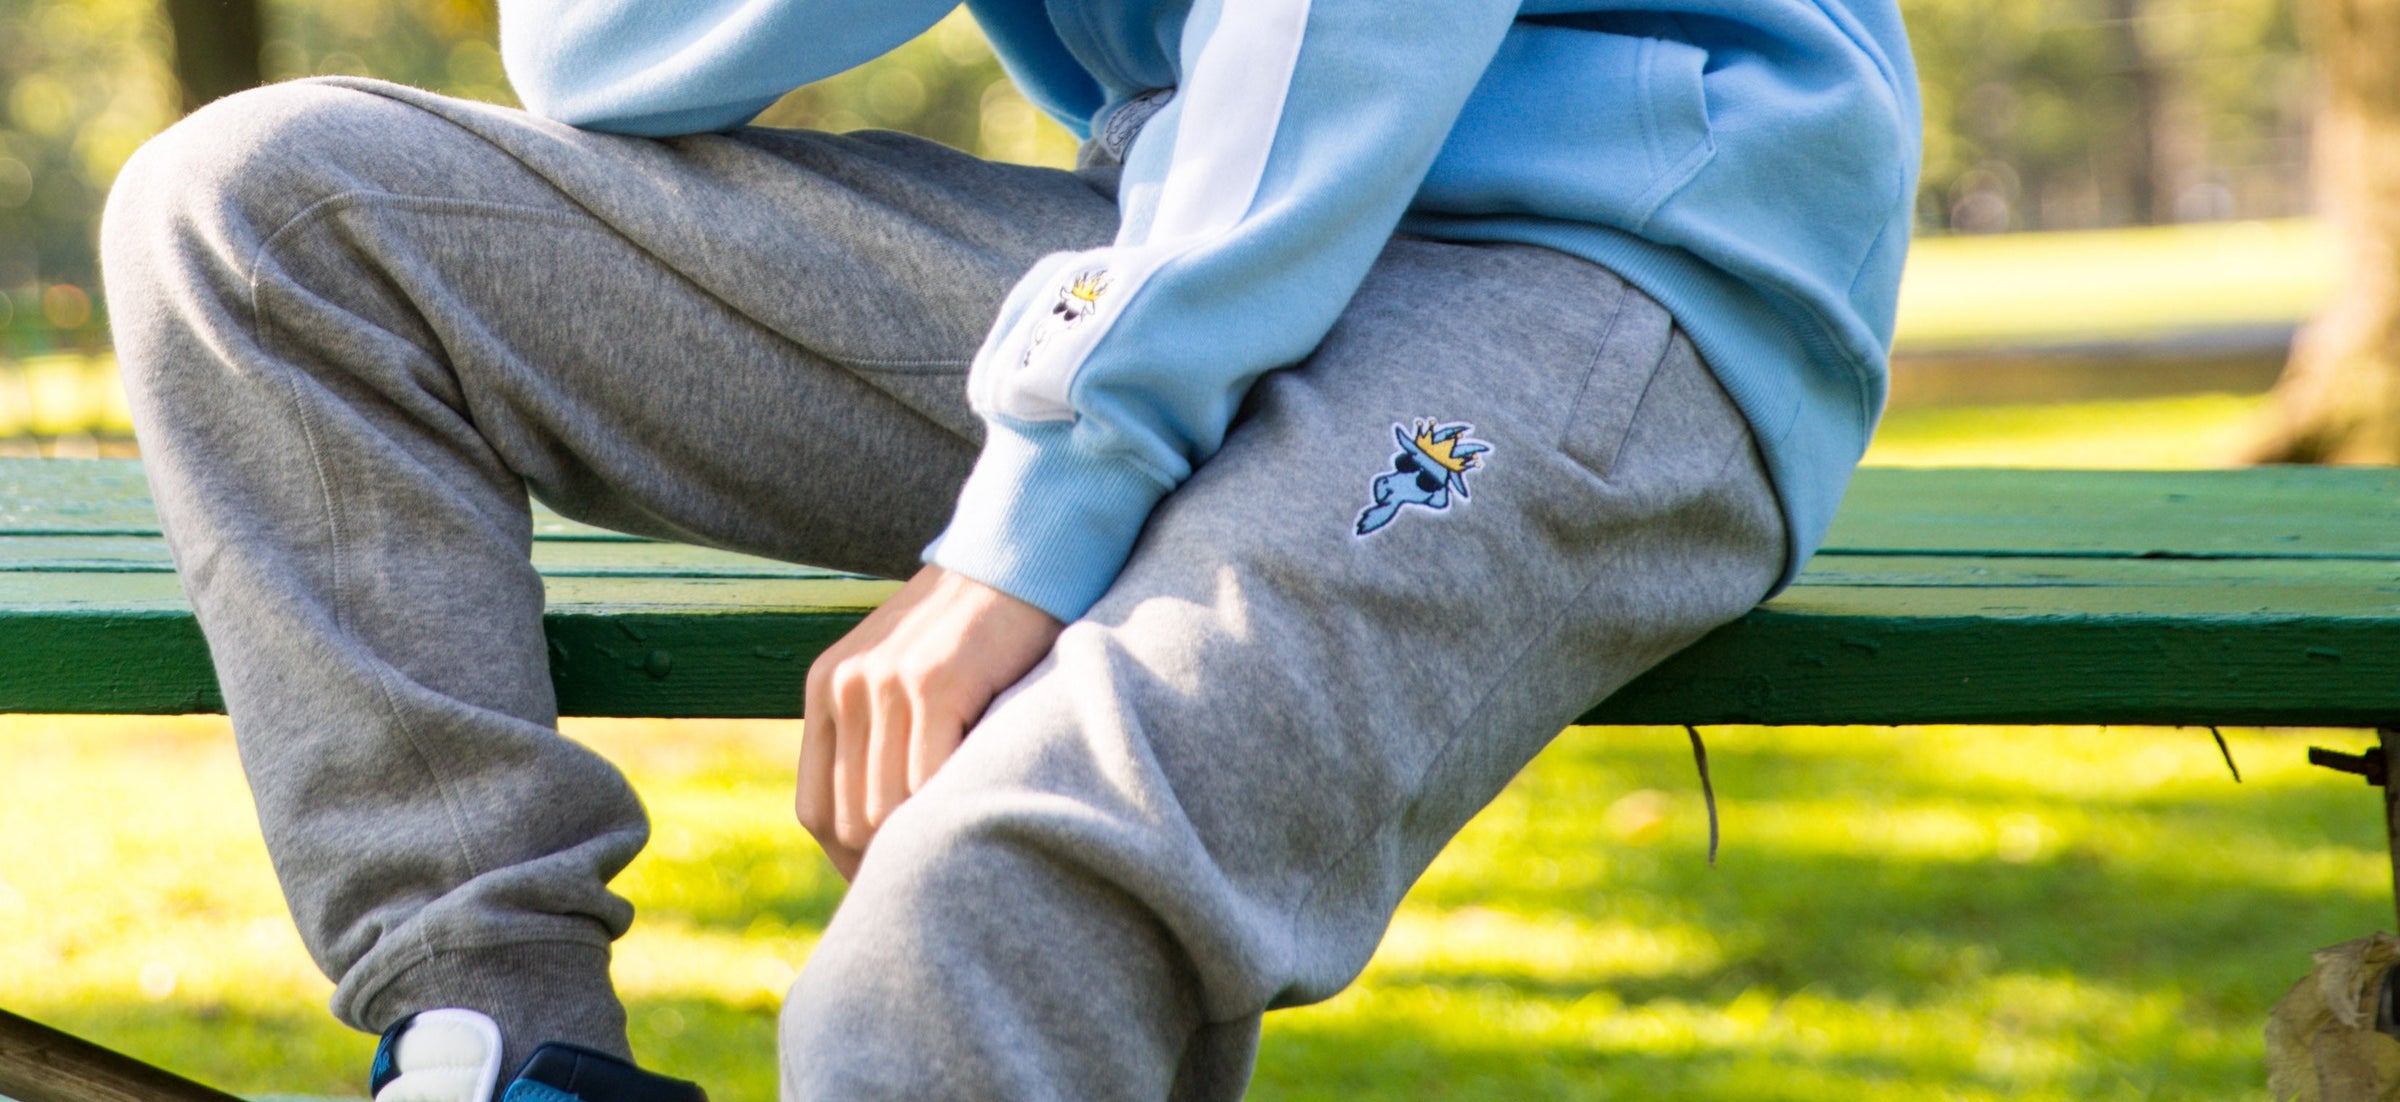 man sitting on a park bench wearing joggers